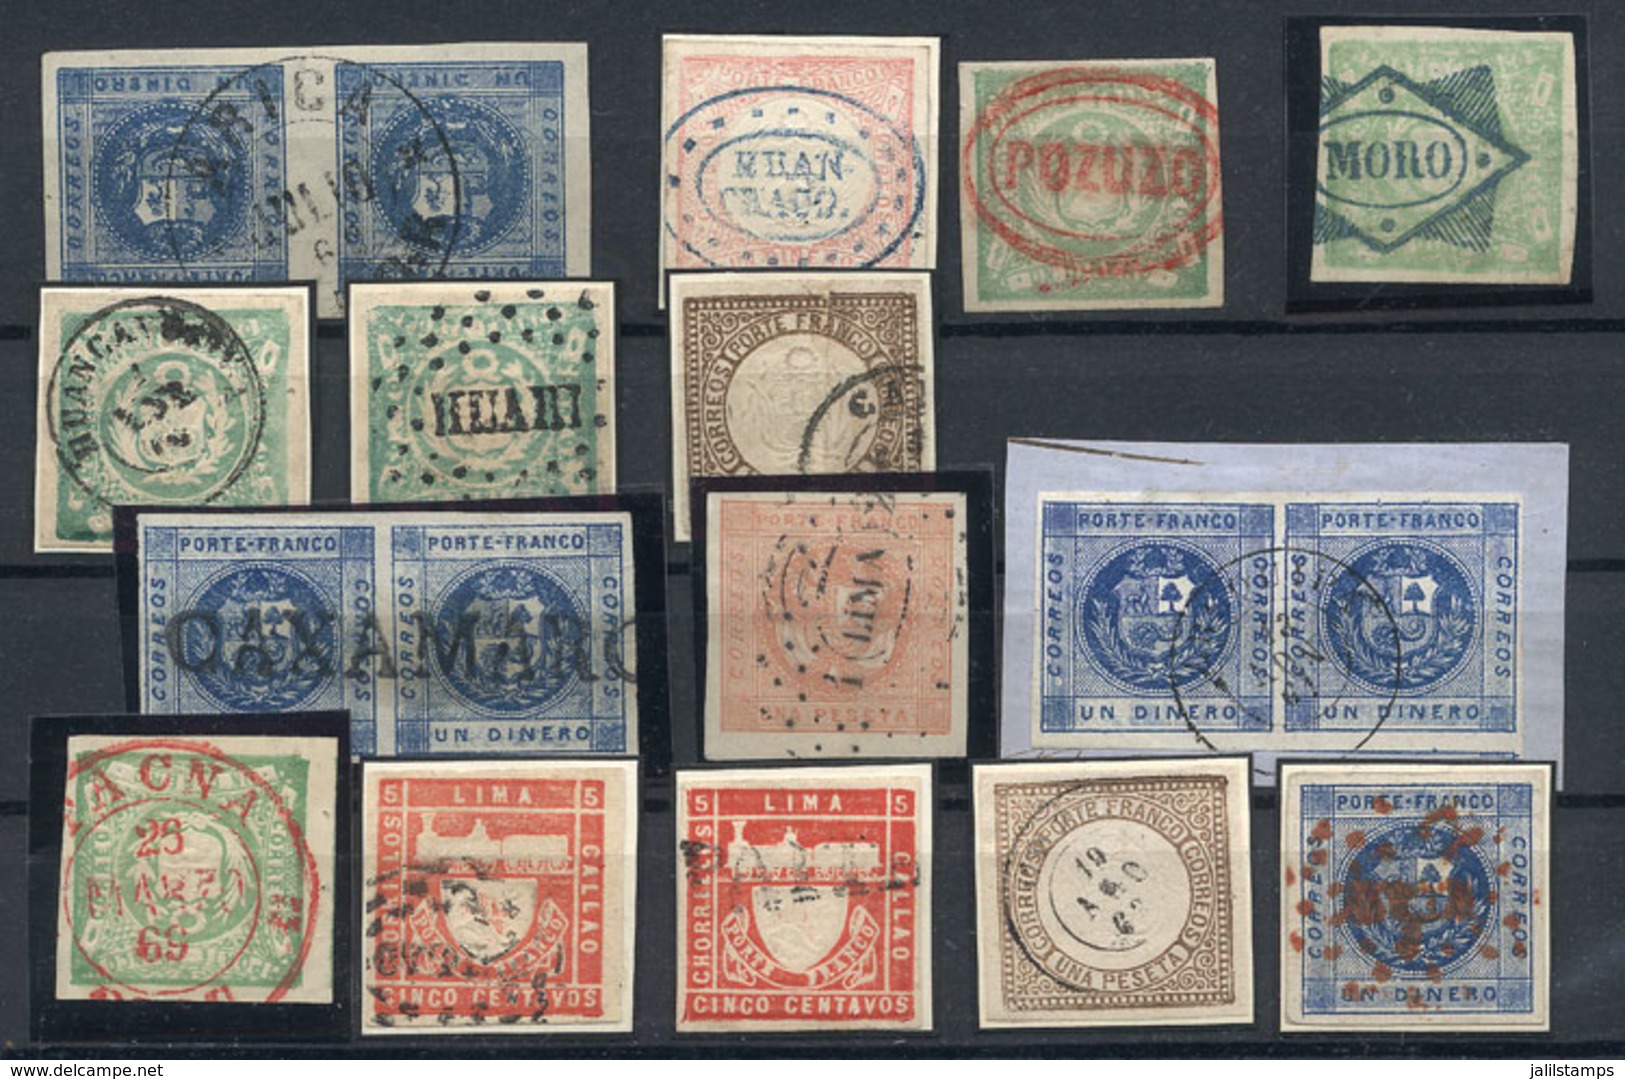 PERU: RARE CANCELS: Stockcard With 3 Pairs And 12 Classic Stamps, All With Rare And Scarce Cancels, For Example Of Arica - Perù